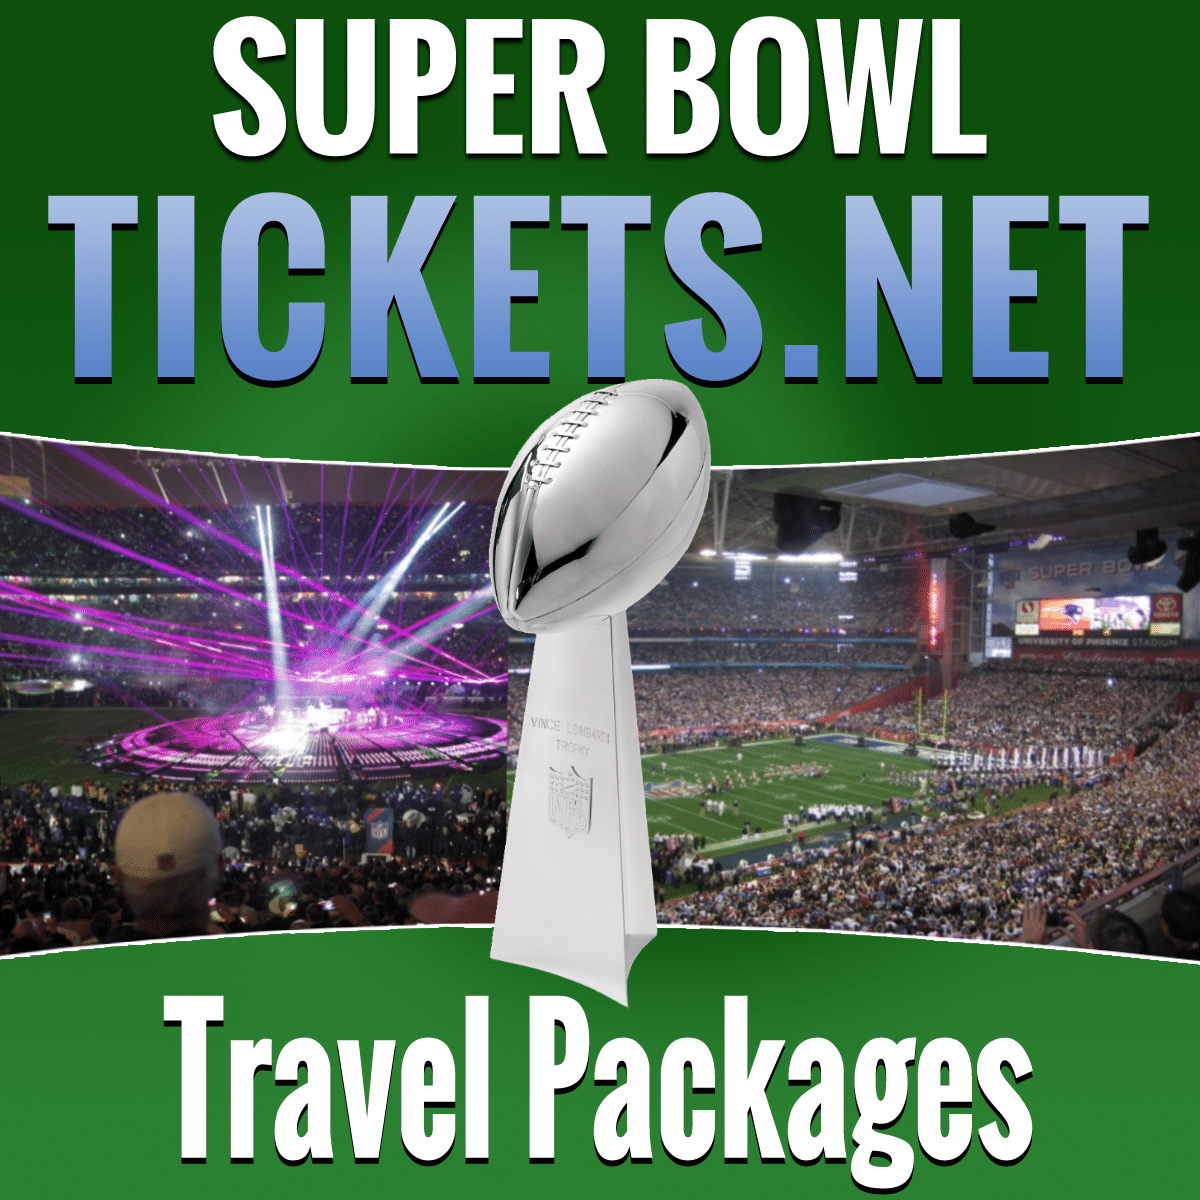 NFL Raises Super Bowl Ticket Prices for 2014 Game! - Superbowl Tickets